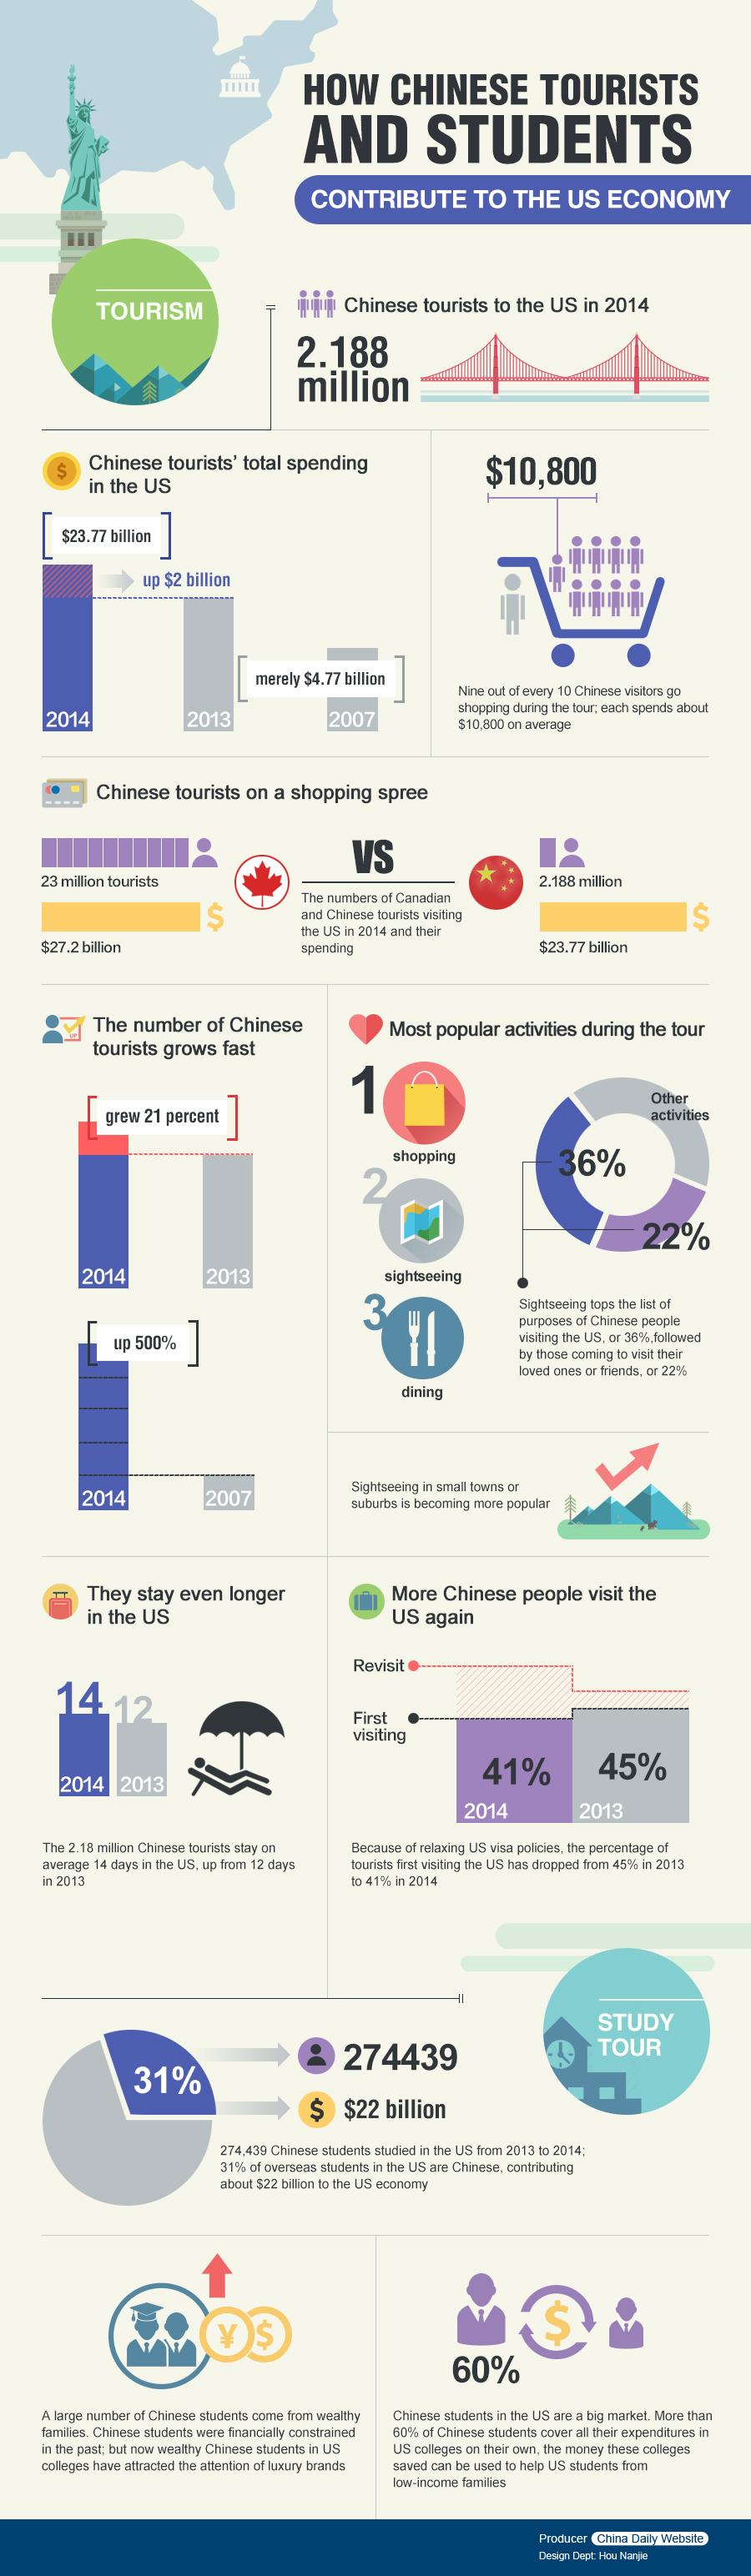 How Chinese tourists and students contribute to the US economy